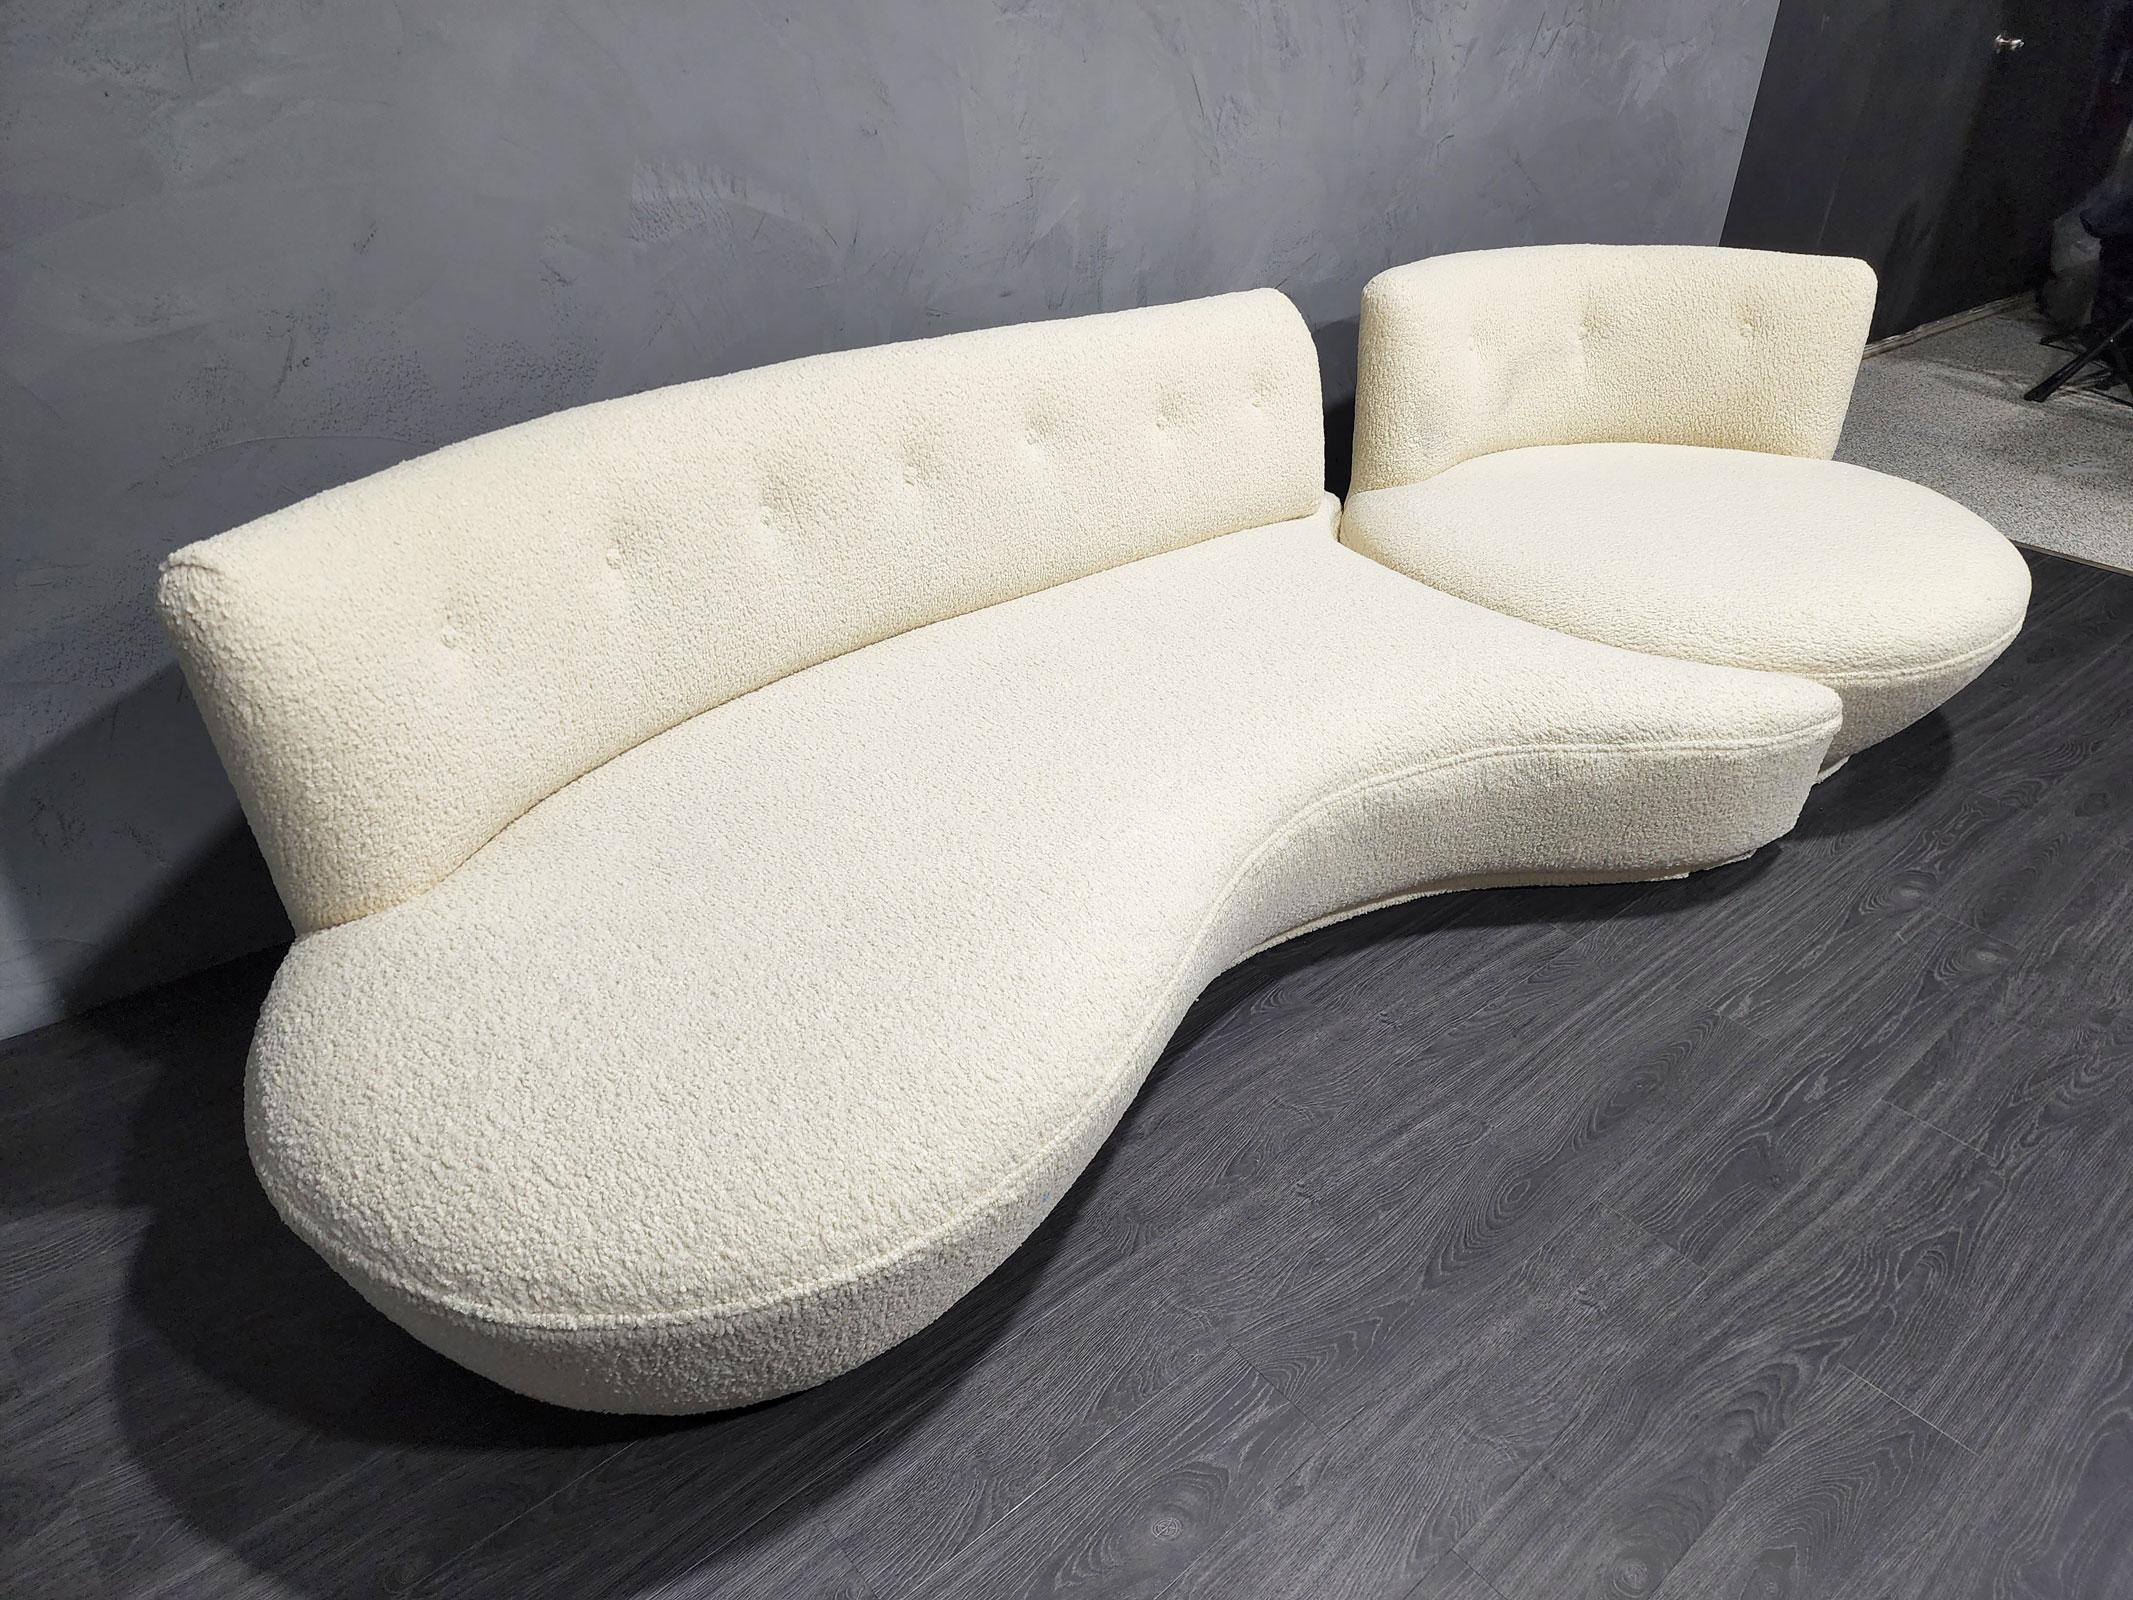 This is a unique design attributed Vladmir Kagan that we believe he did for boutique hotels. The swivel chair butts up to the sofa and can fit two people. The swivel turns 360 degrees. We have a pair of these sofas although upholstery does not match.